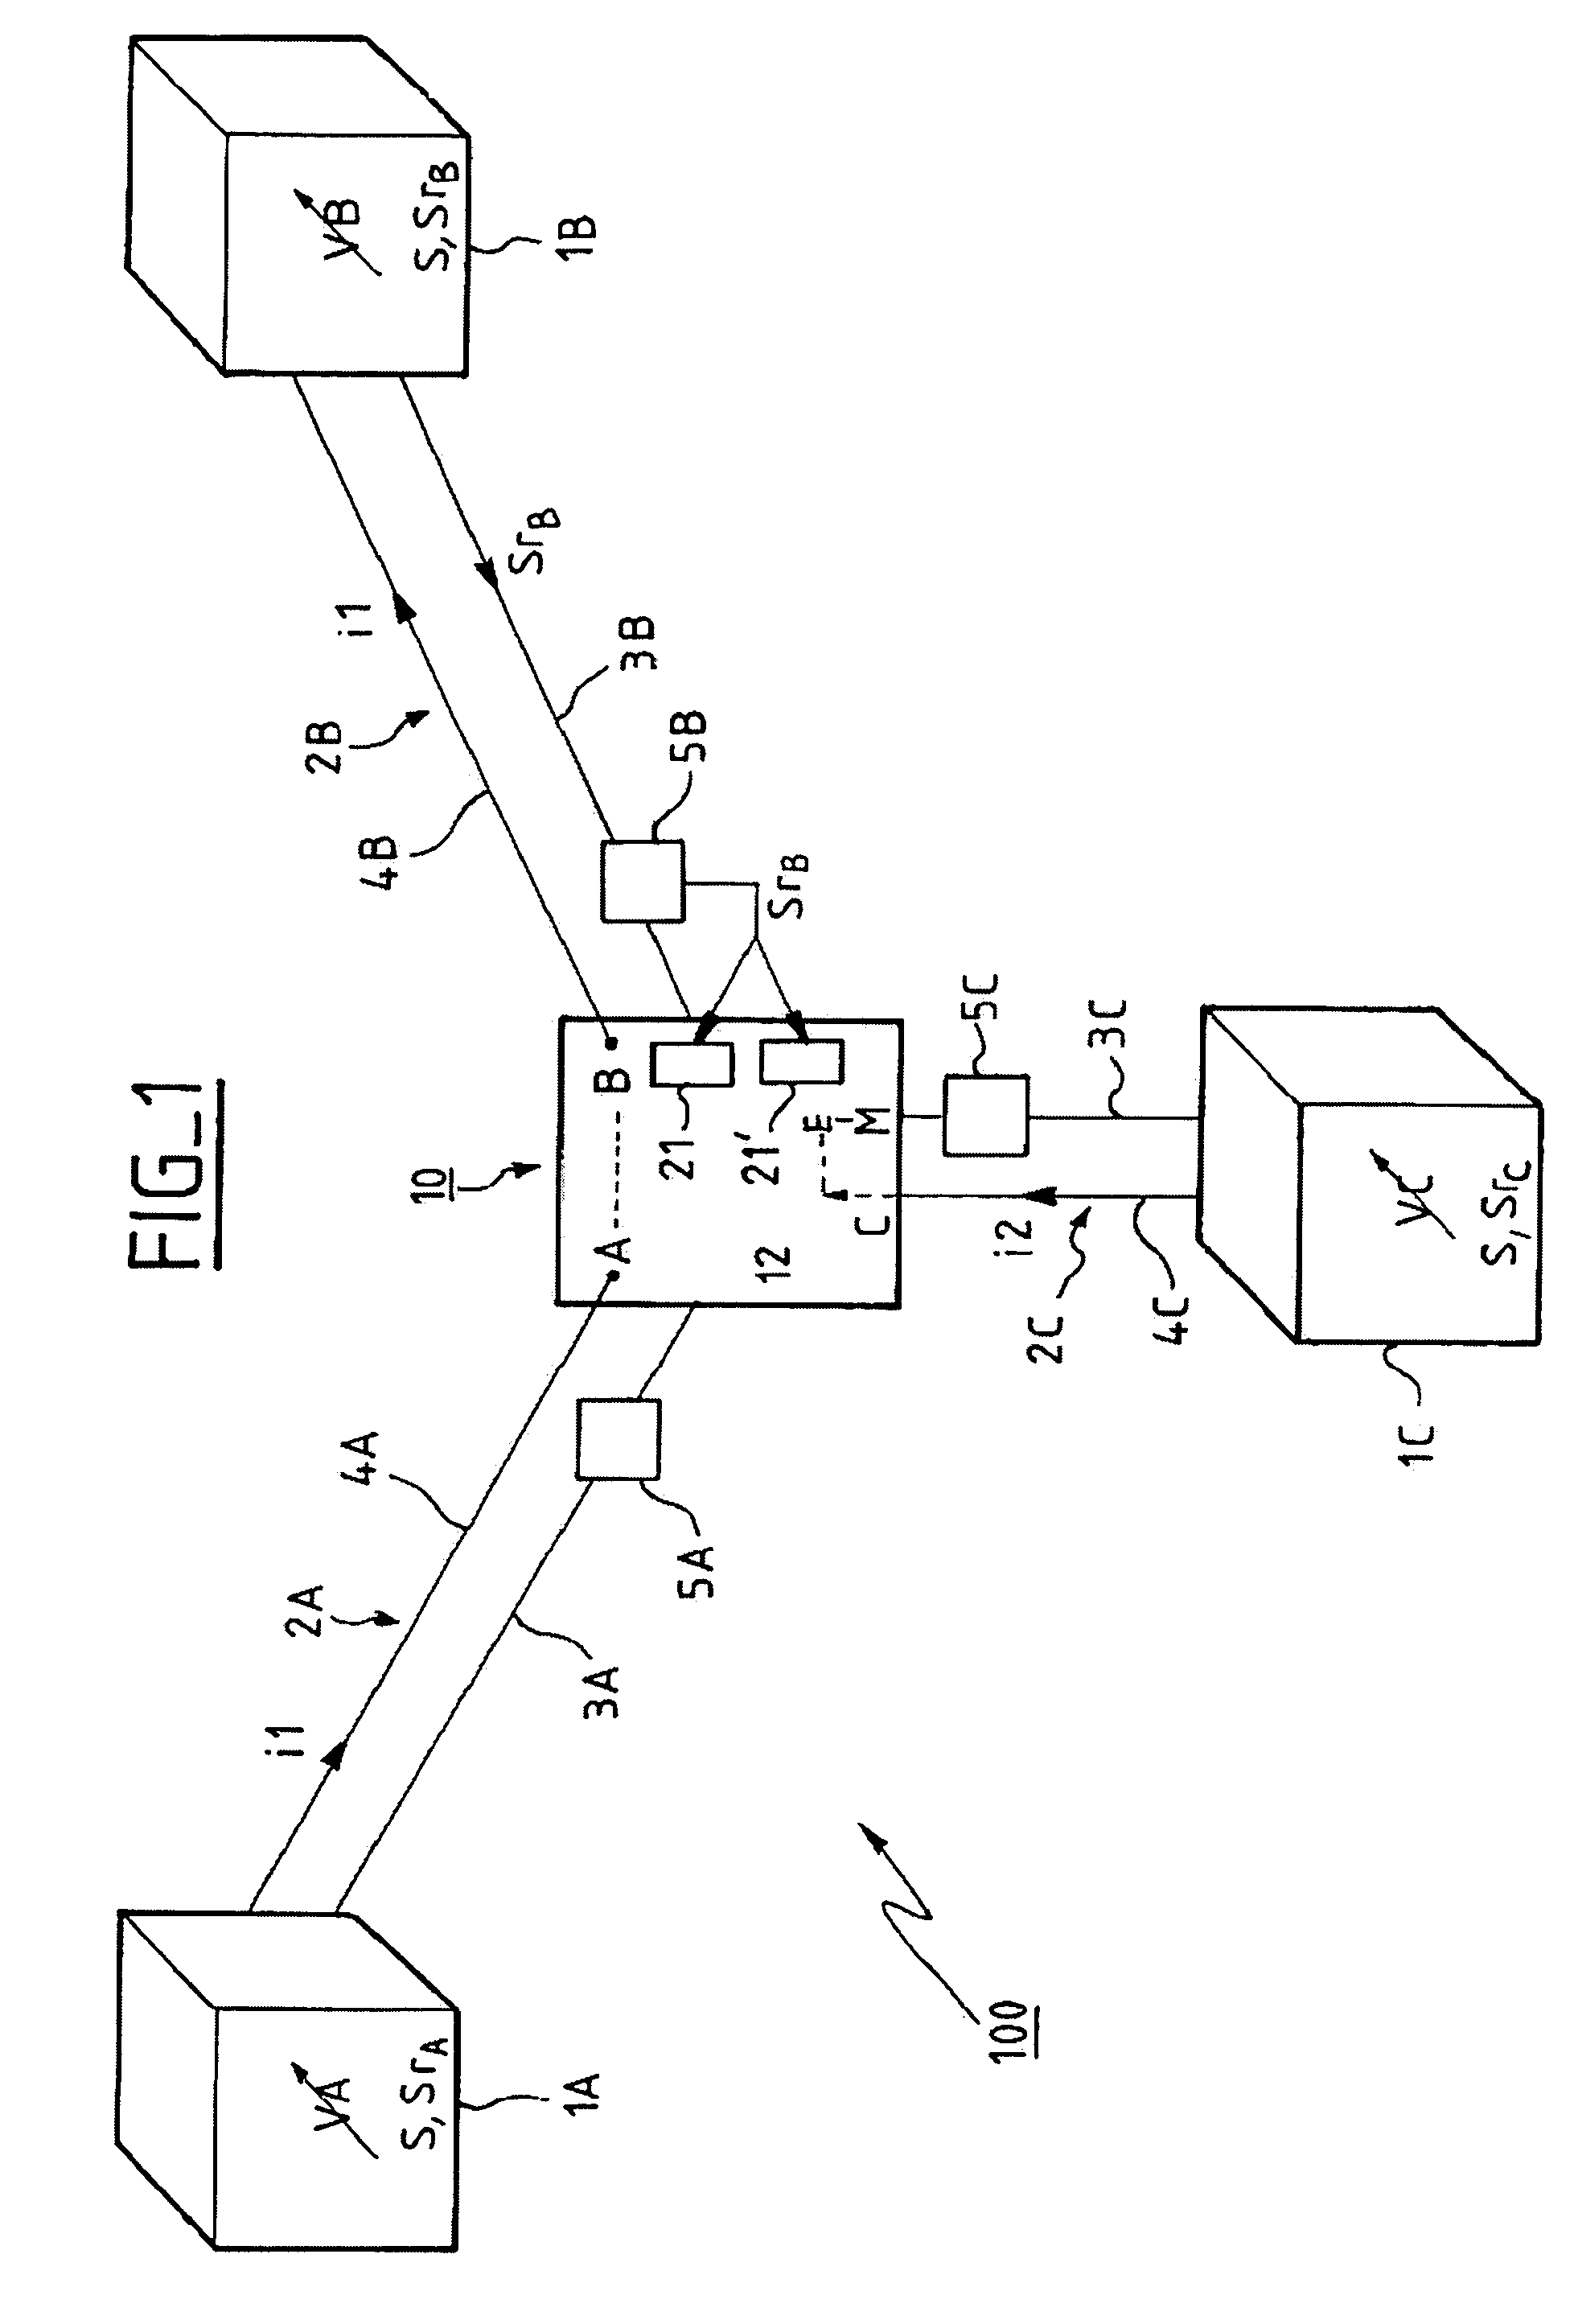 Branching unit with reconfigurable terminal connections